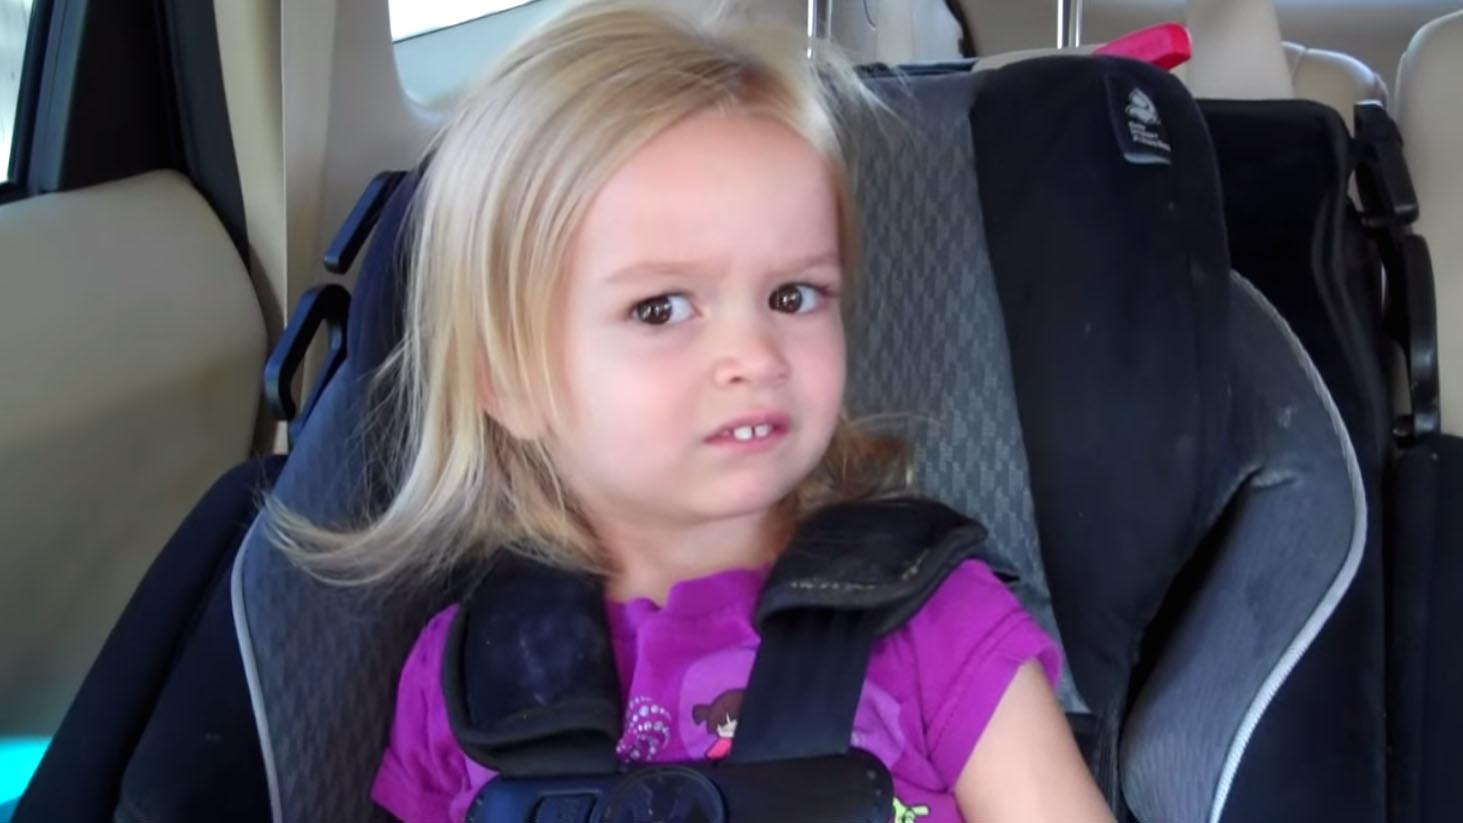 Young girl with two front teeth in a car seat looking at the camera with disgust